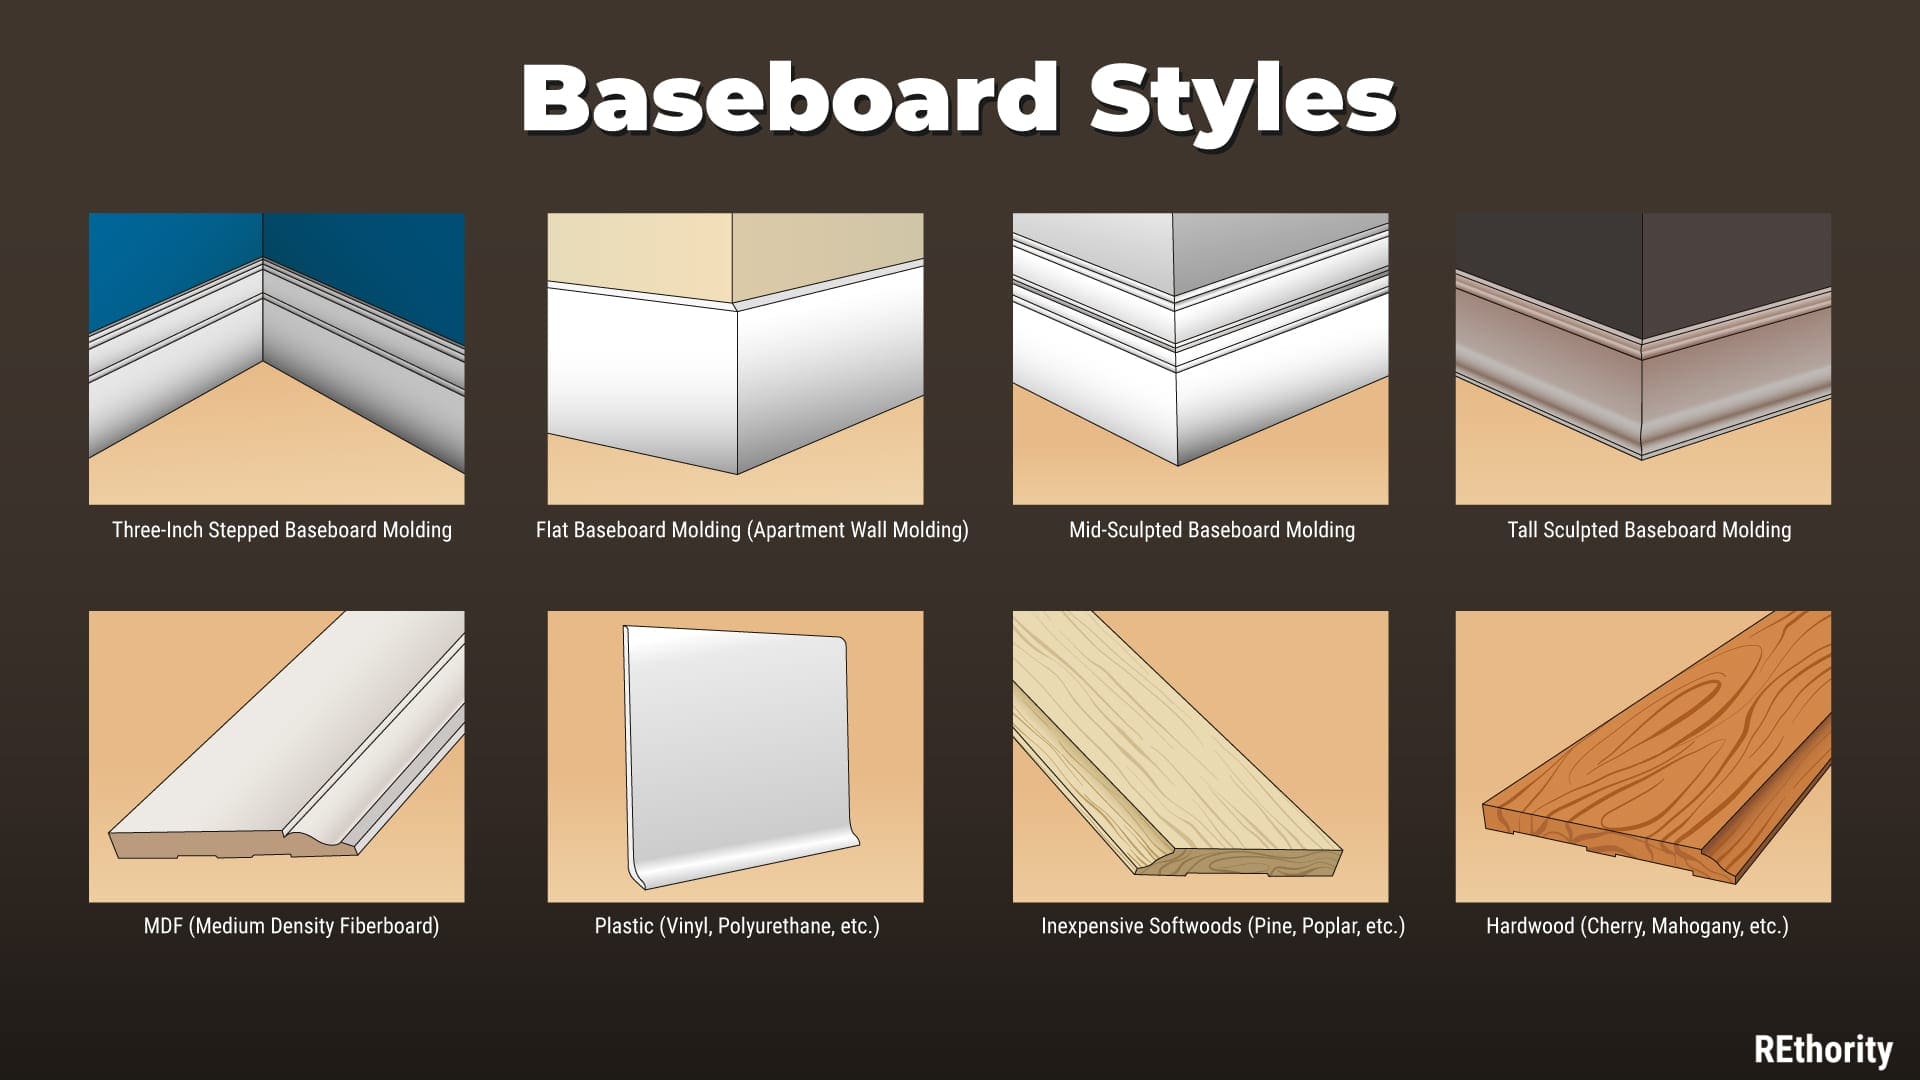 Image with all the various types of baseboard styles available to buy